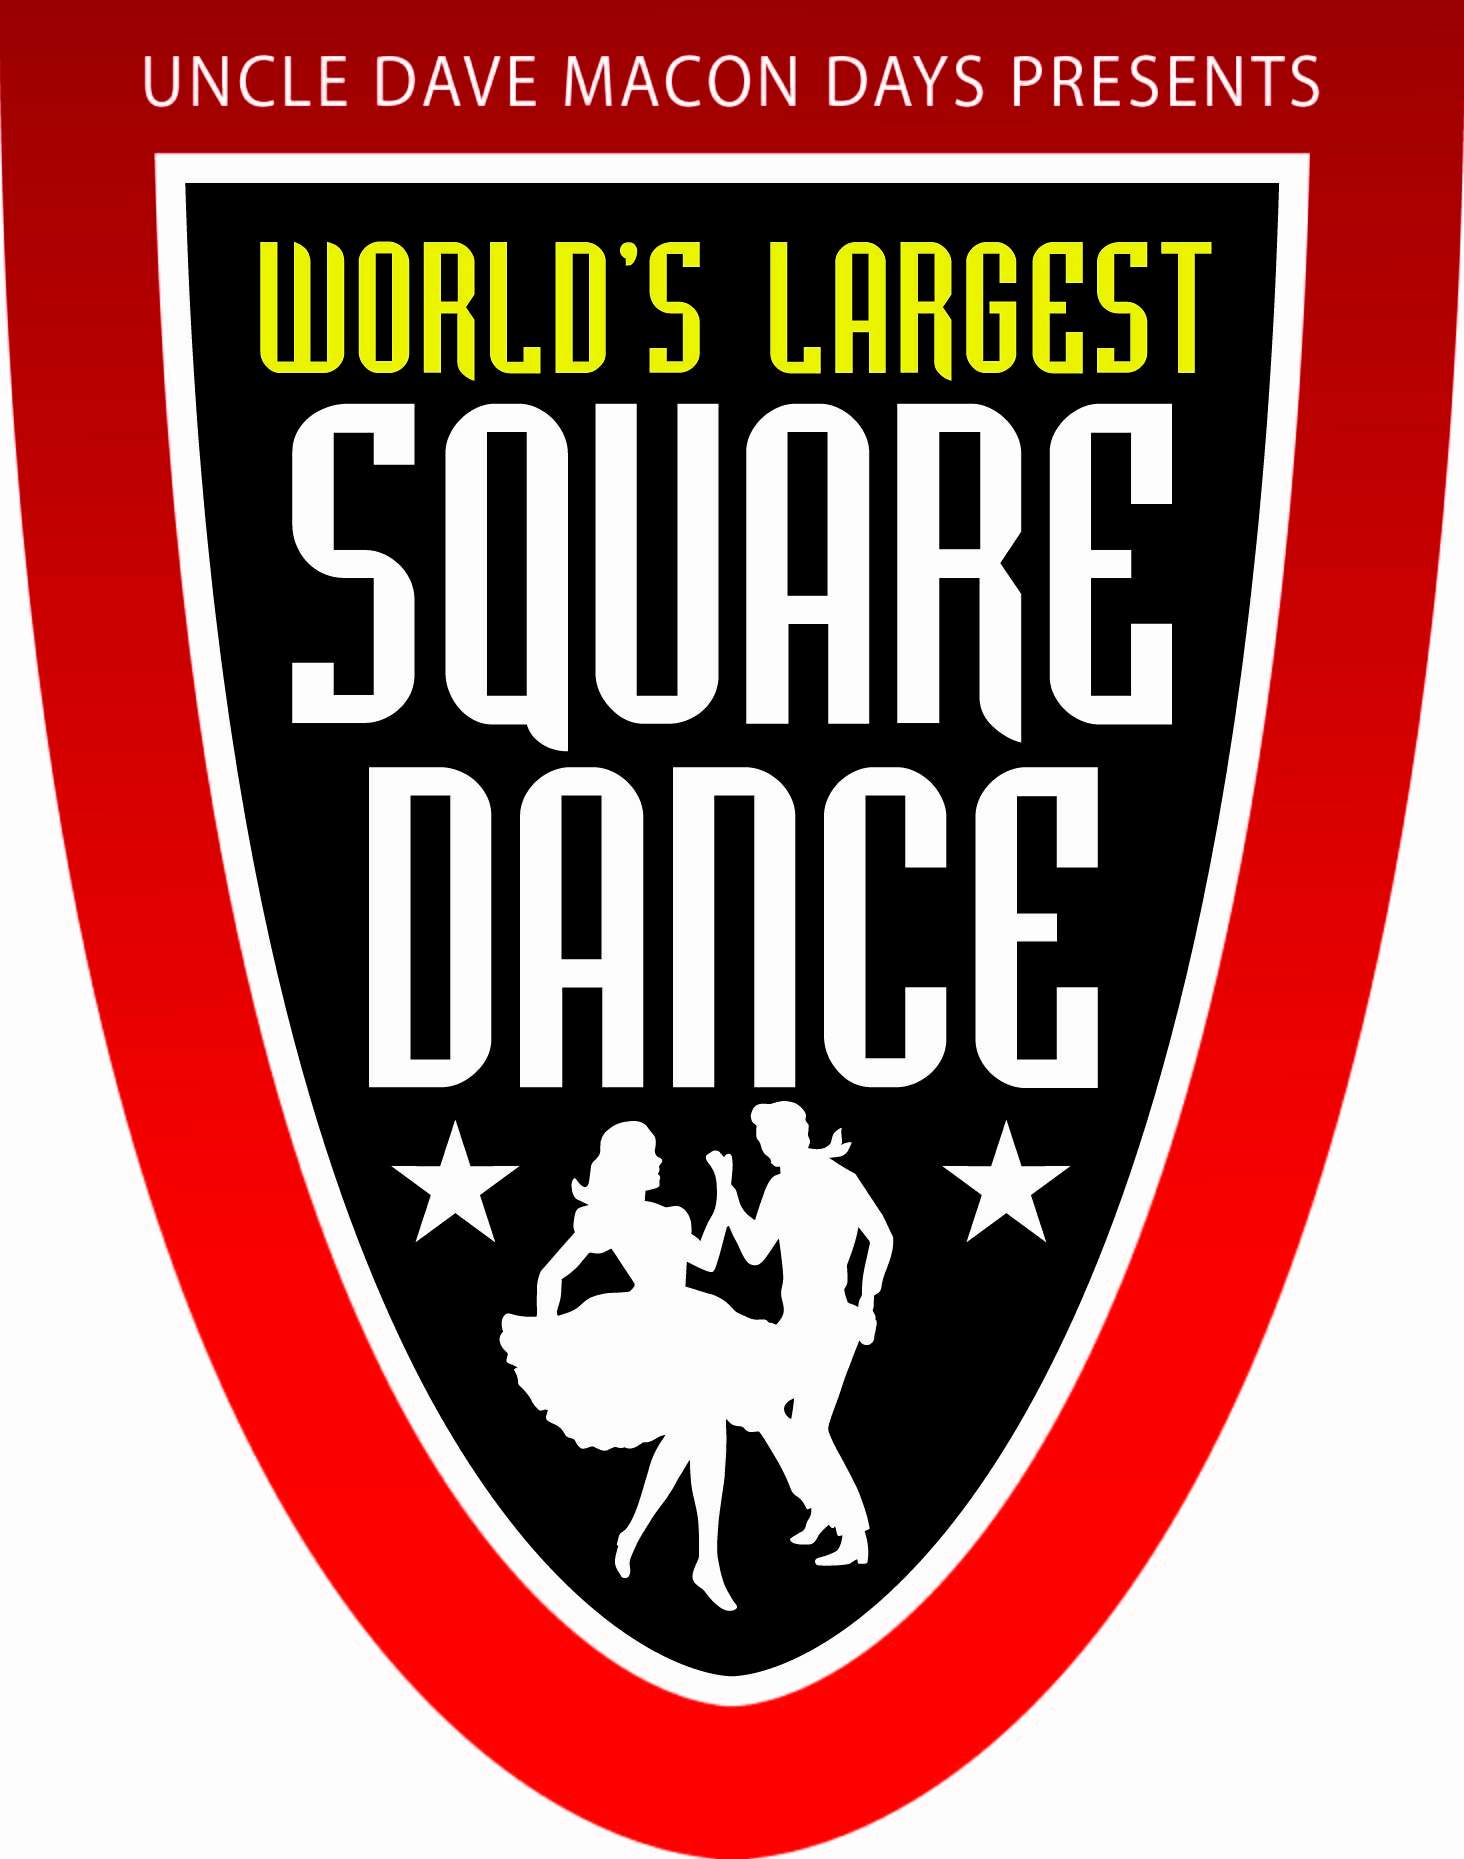 Uncle Dave Macon Days presents World's Largest Square Dance logo